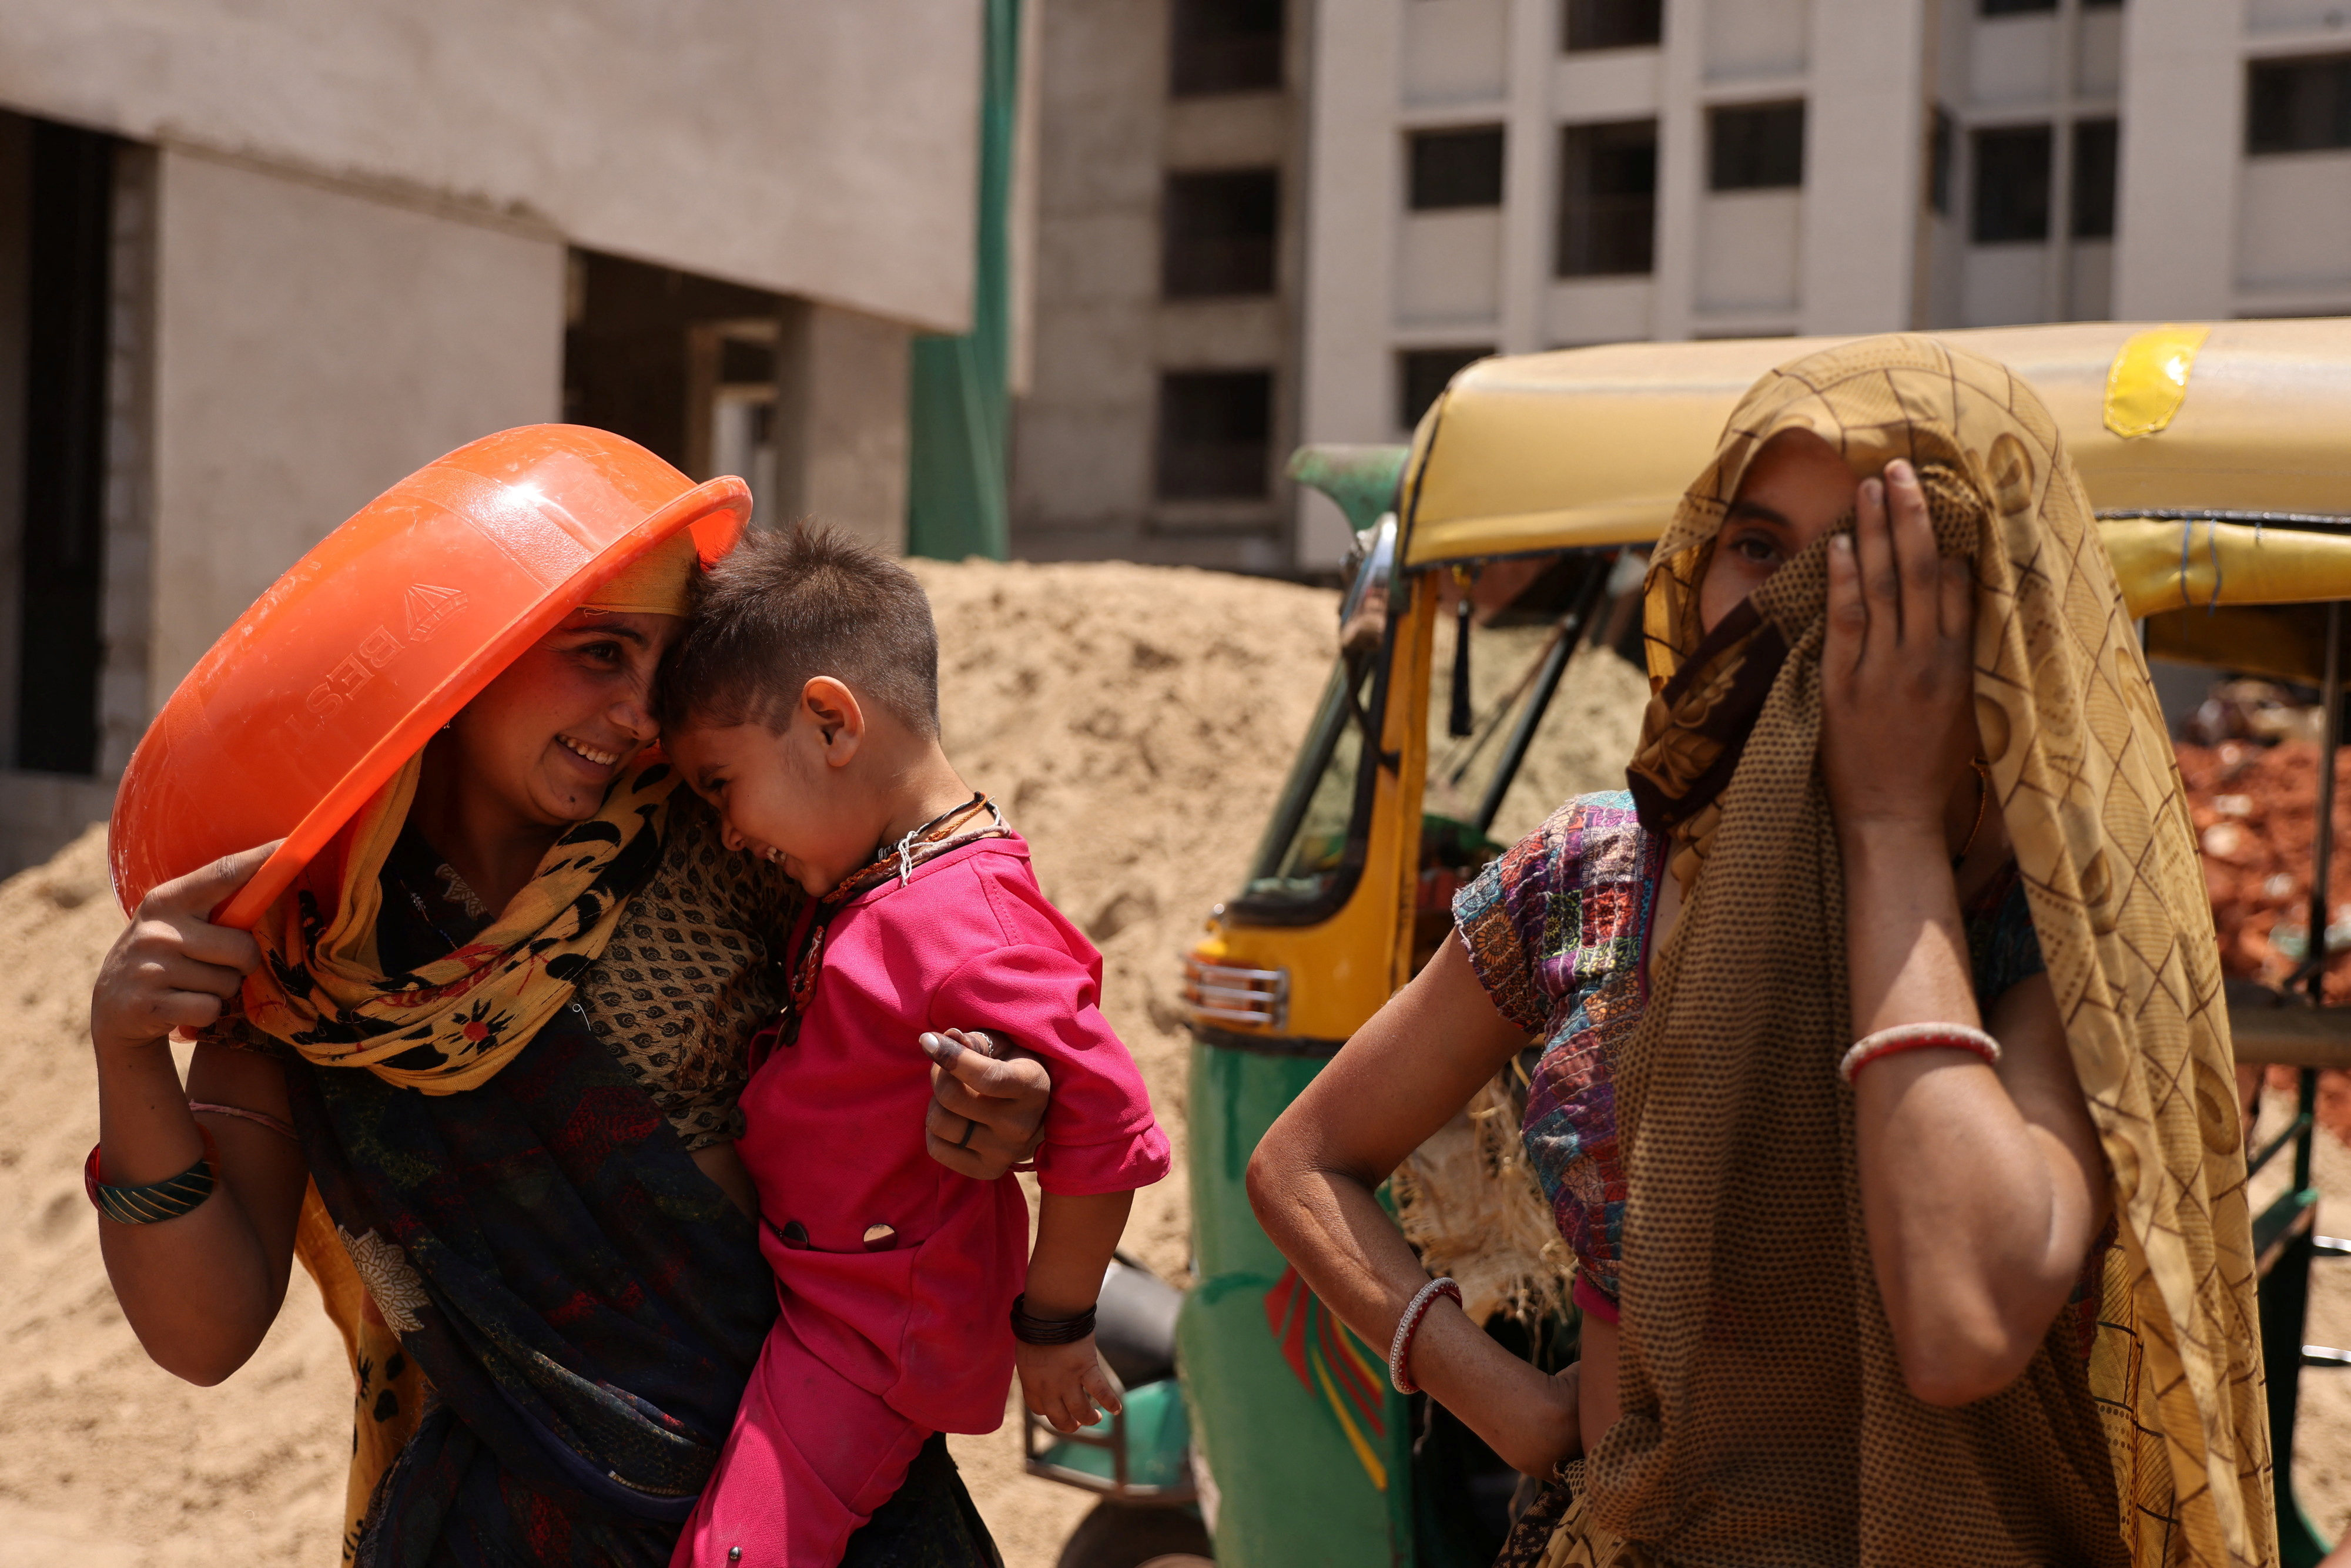 Women take shelter from the sun at a construction site in Ahmedabad, India. Photo: Reuters